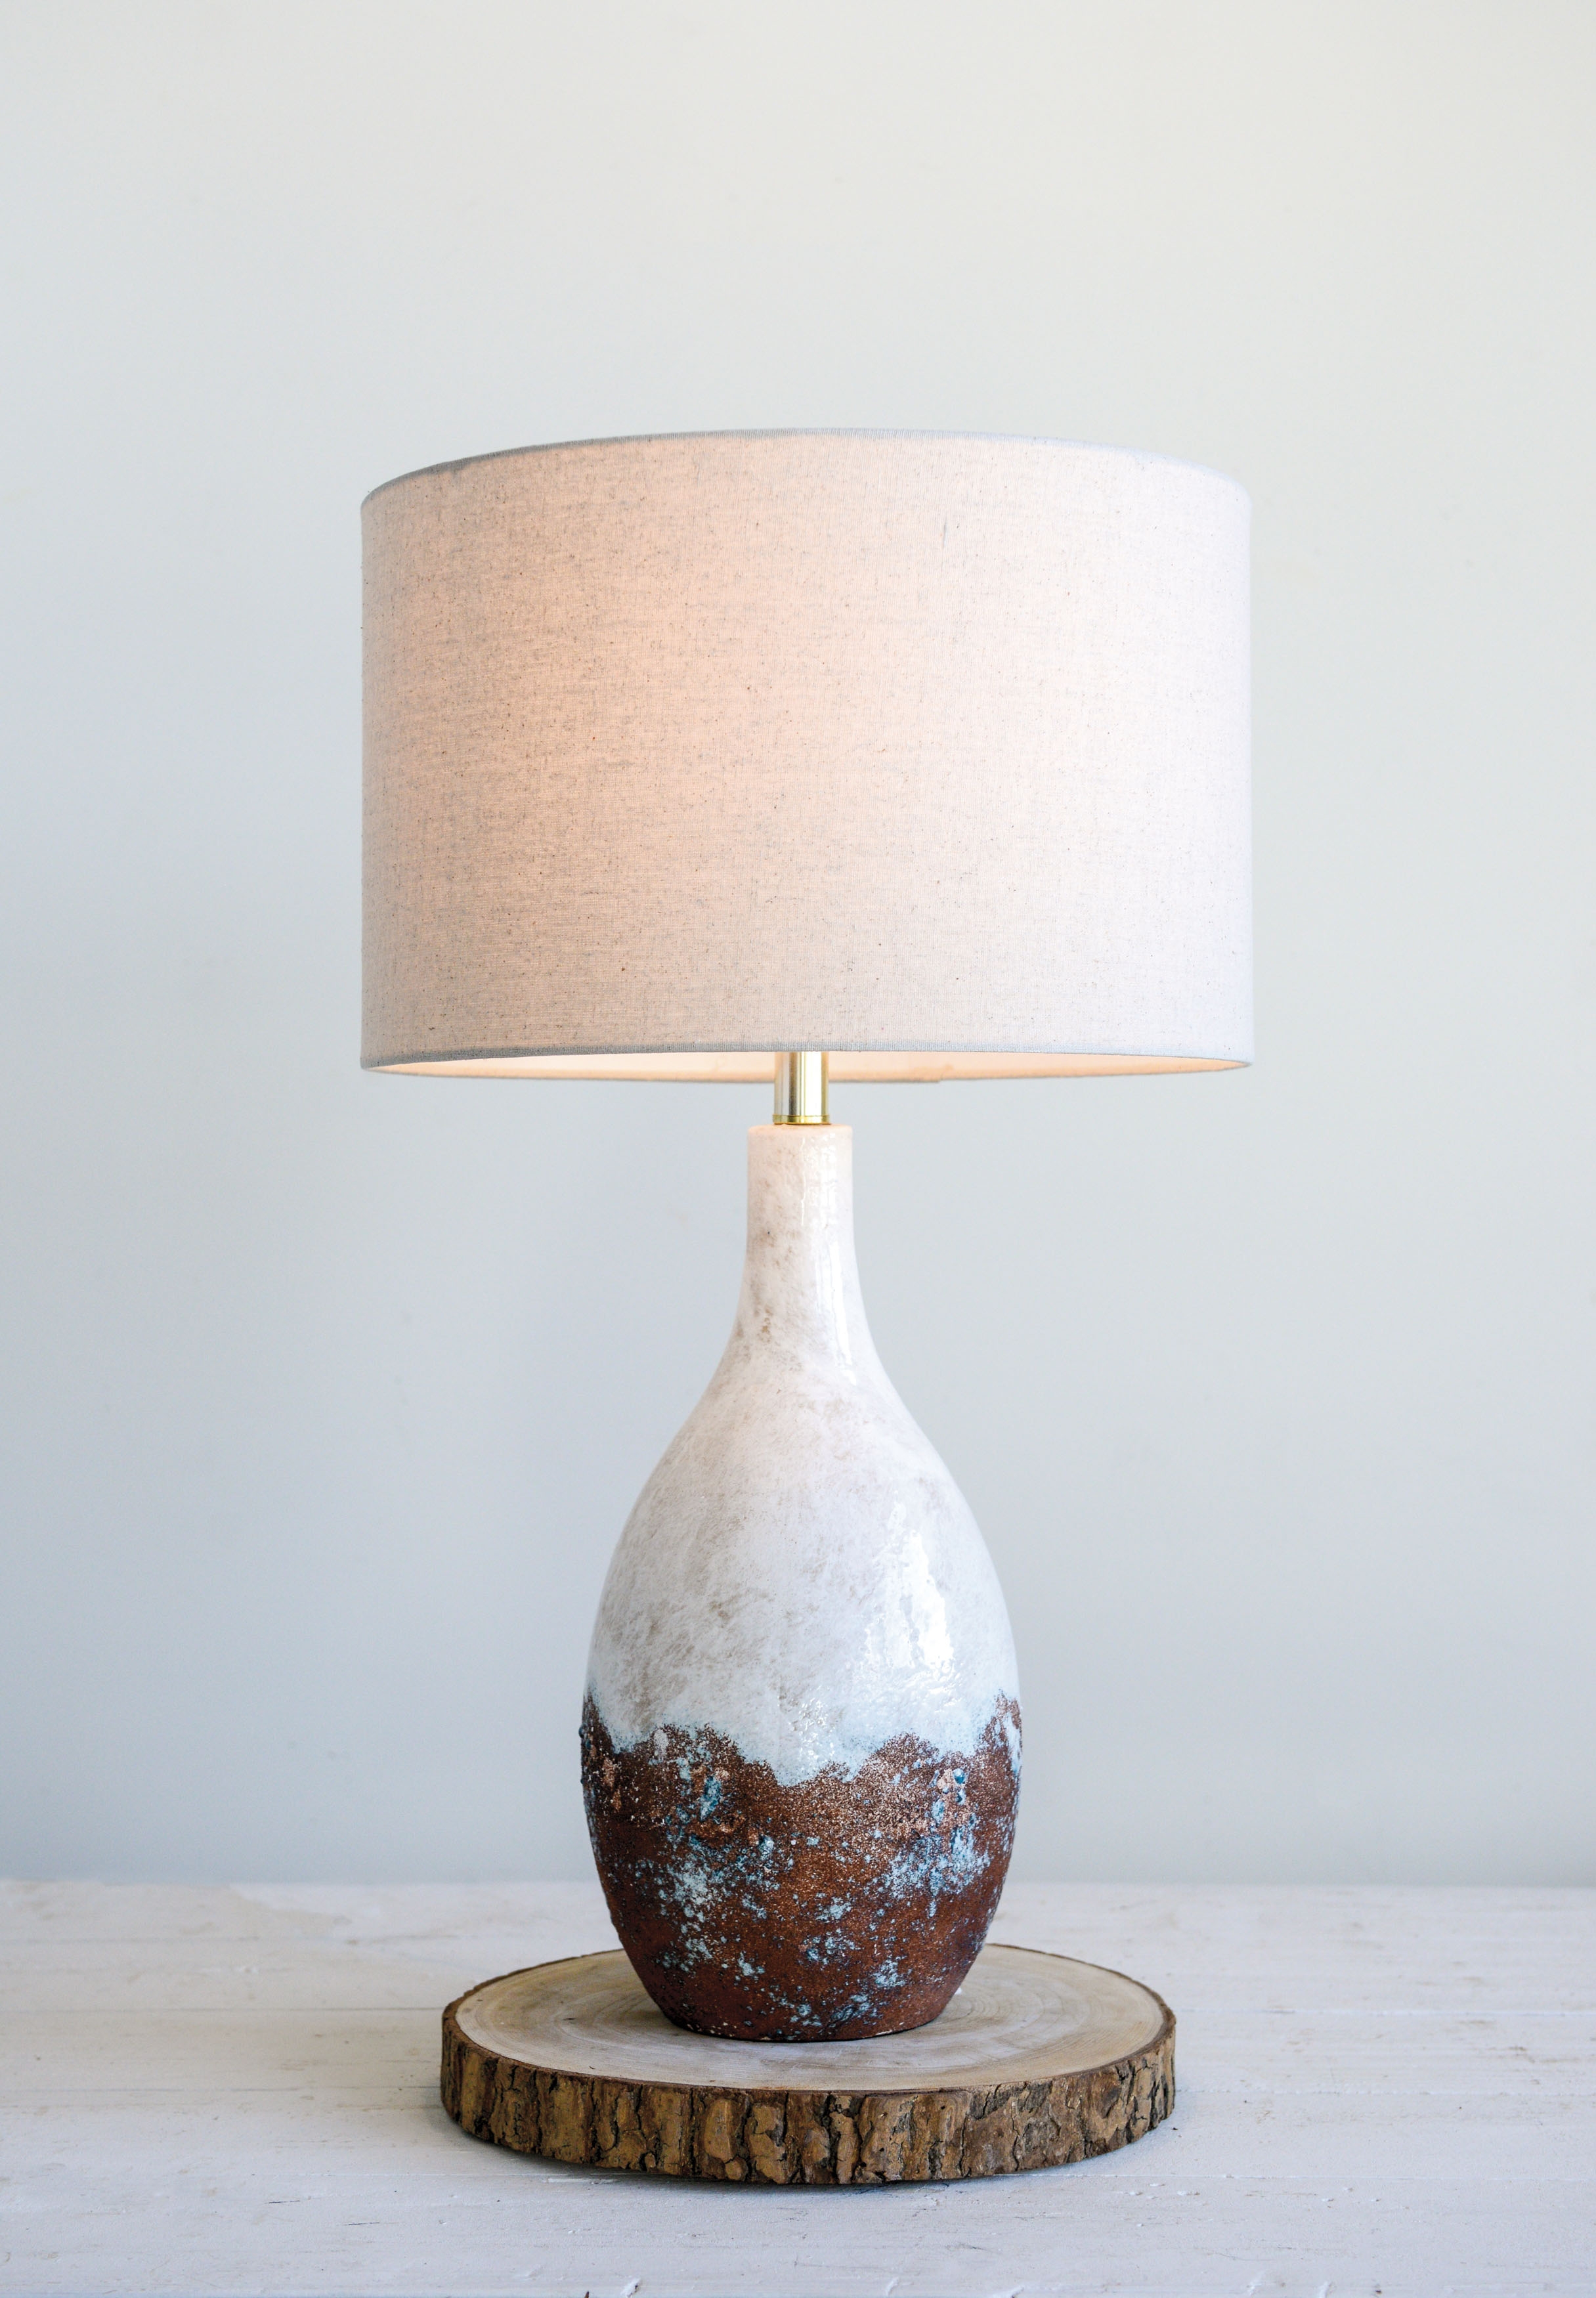 2-Tone Ceramic Table Lamp with Linen Shade (Each one will vary) - Image 1